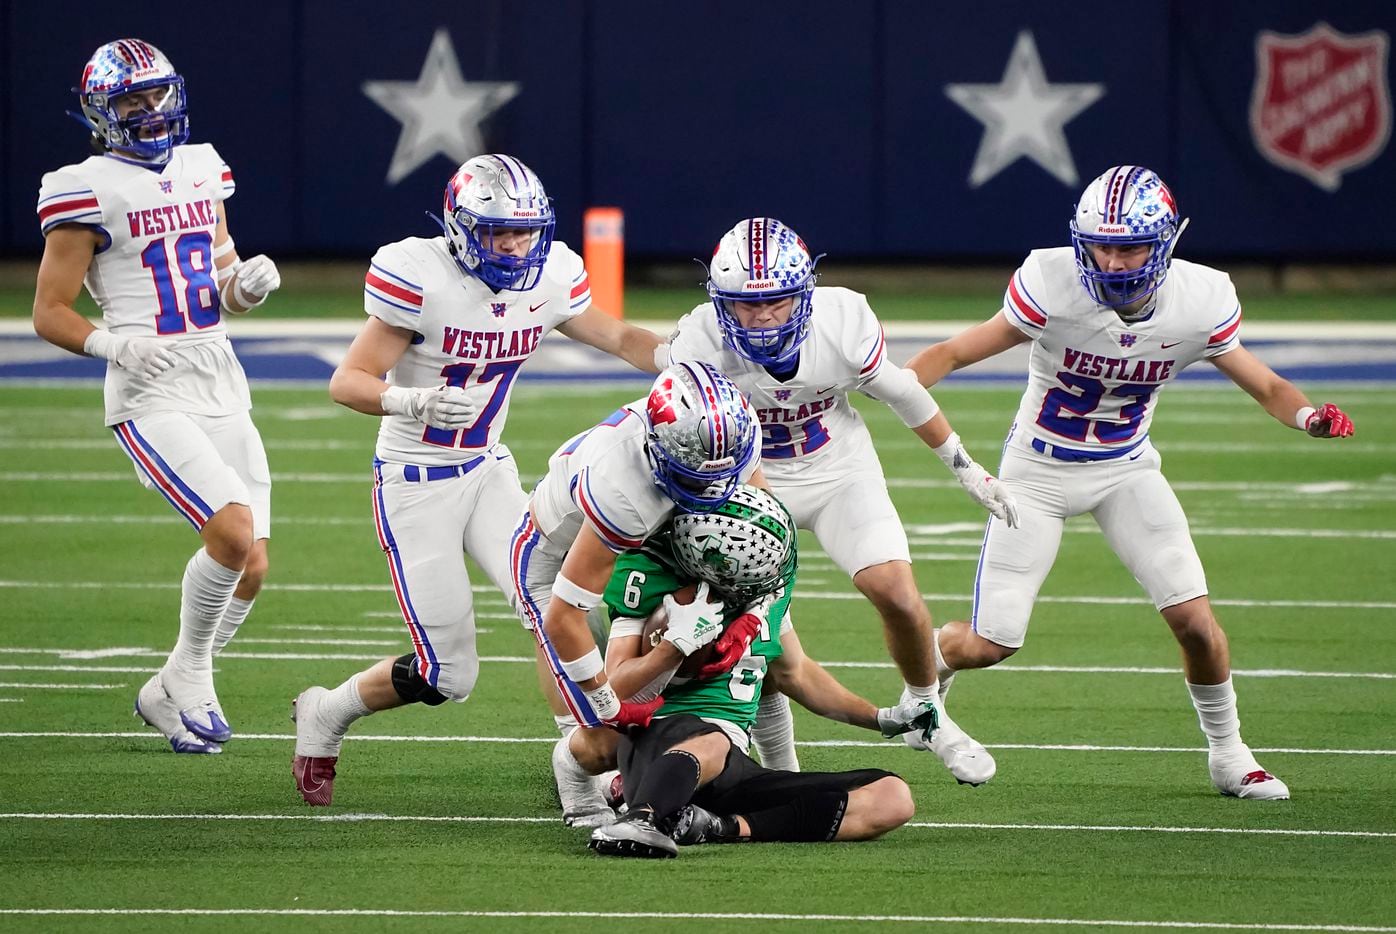 Southlake Carroll wide receiver Landon Samson (6) is brought down by Austin Westlake defensive back Michael Taaffe (14) as defensive back Ford Dickerson (18), linebacker Brady Lamme (17), defensive back Carter Barksdale (21) and defensive back Beau Breathard (23) close in on the play during the second quarter of the Class 6A Division I state football championship game at AT&T Stadium on Saturday, Jan. 16, 2021, in Arlington, Texas. (Smiley N. Pool/The Dallas Morning News)